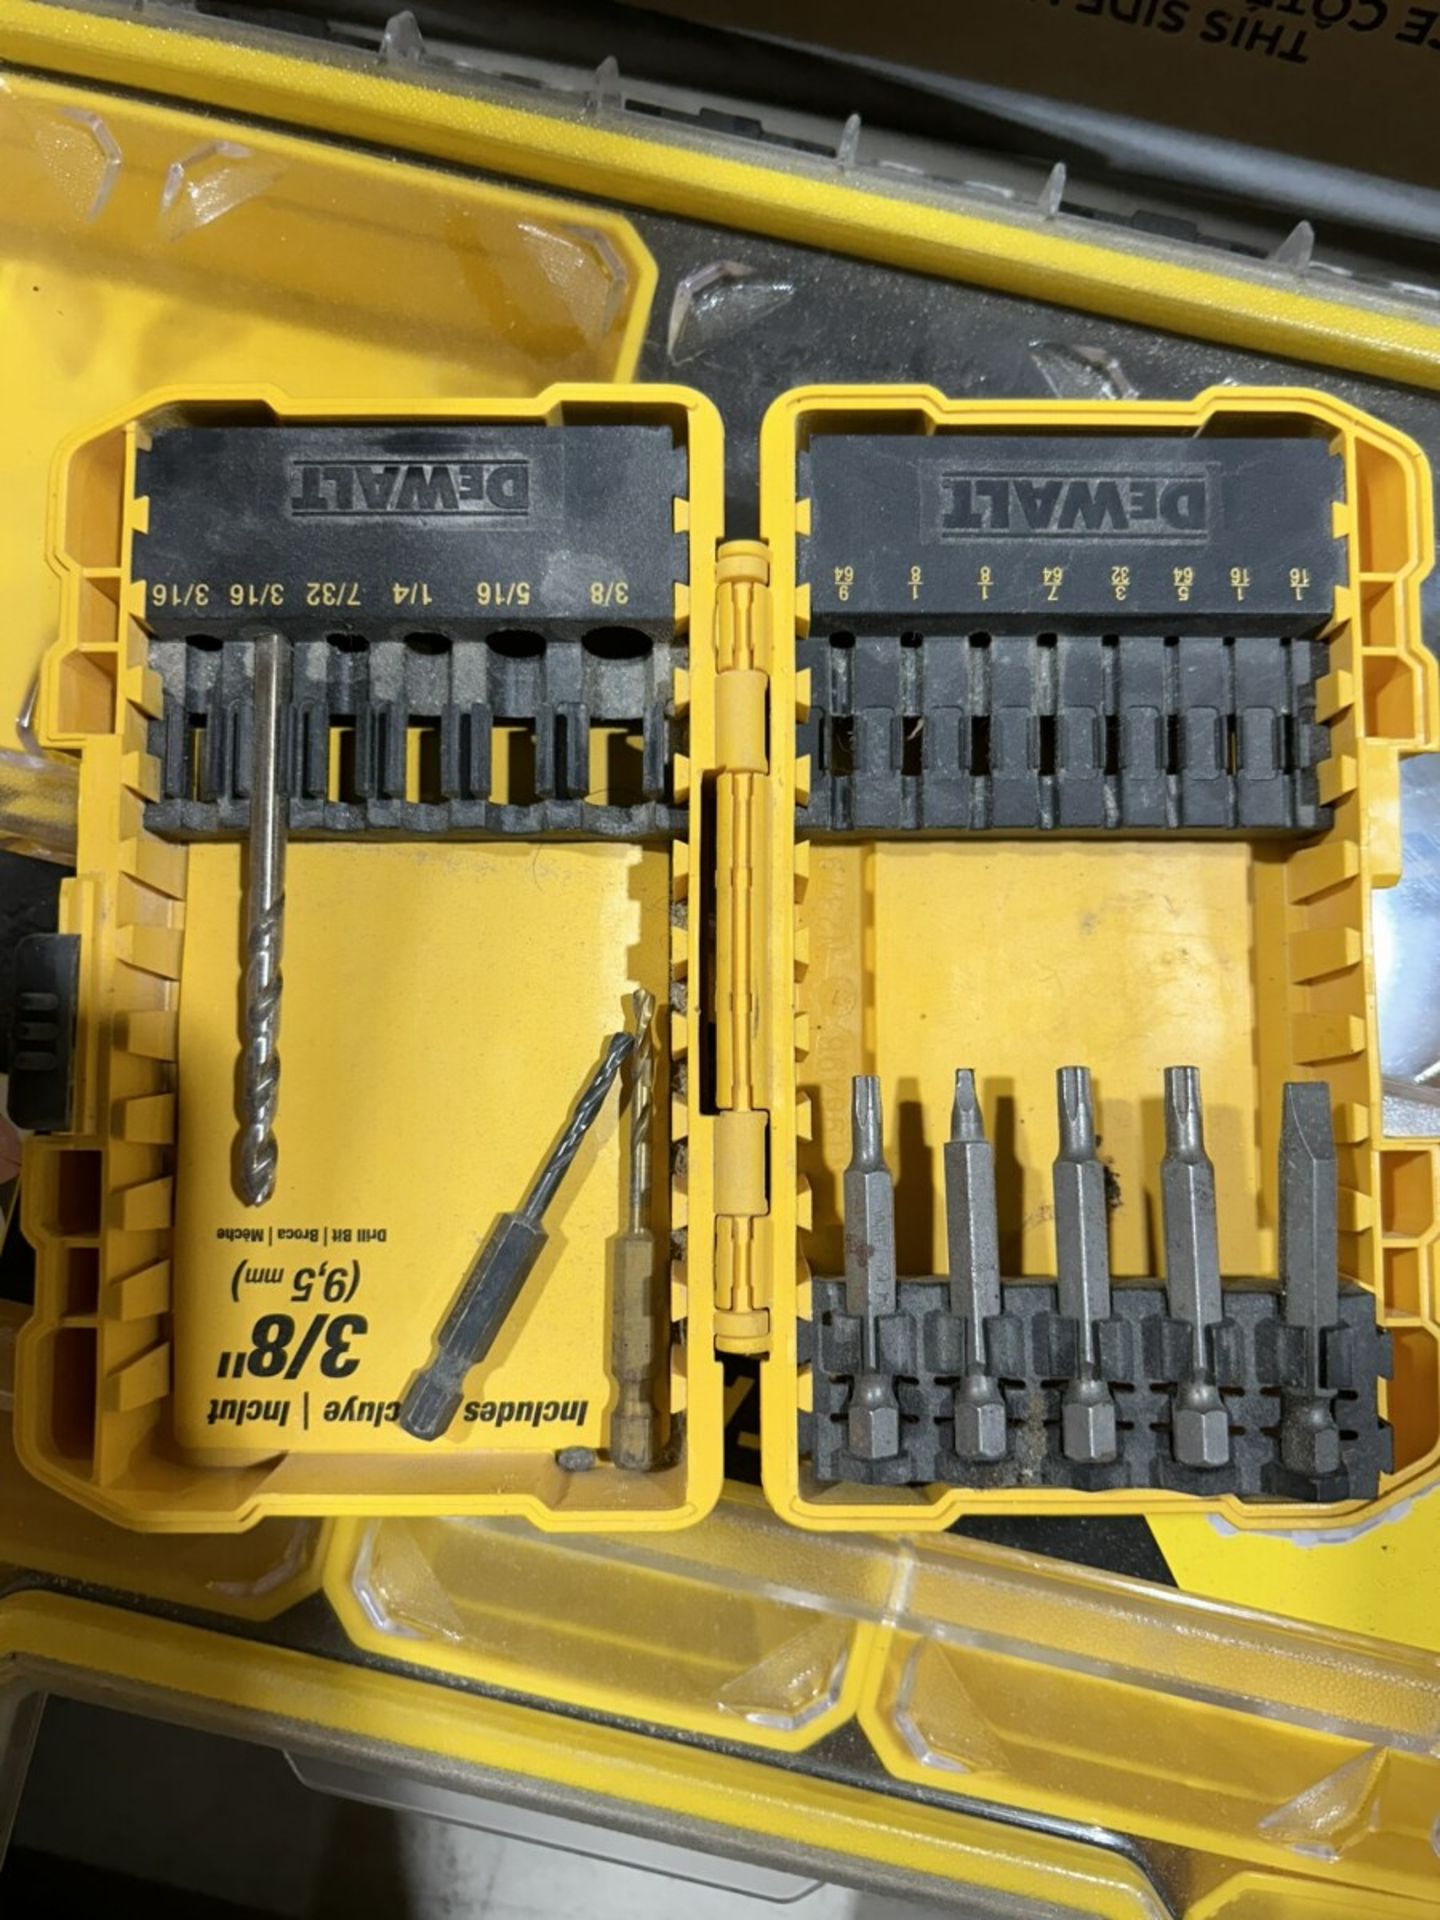 L/O ASSORTED DEWALT DRIVER BIT BOXES, DRIVER BITS, STANLEY POLY TOOL BOX - Image 4 of 14